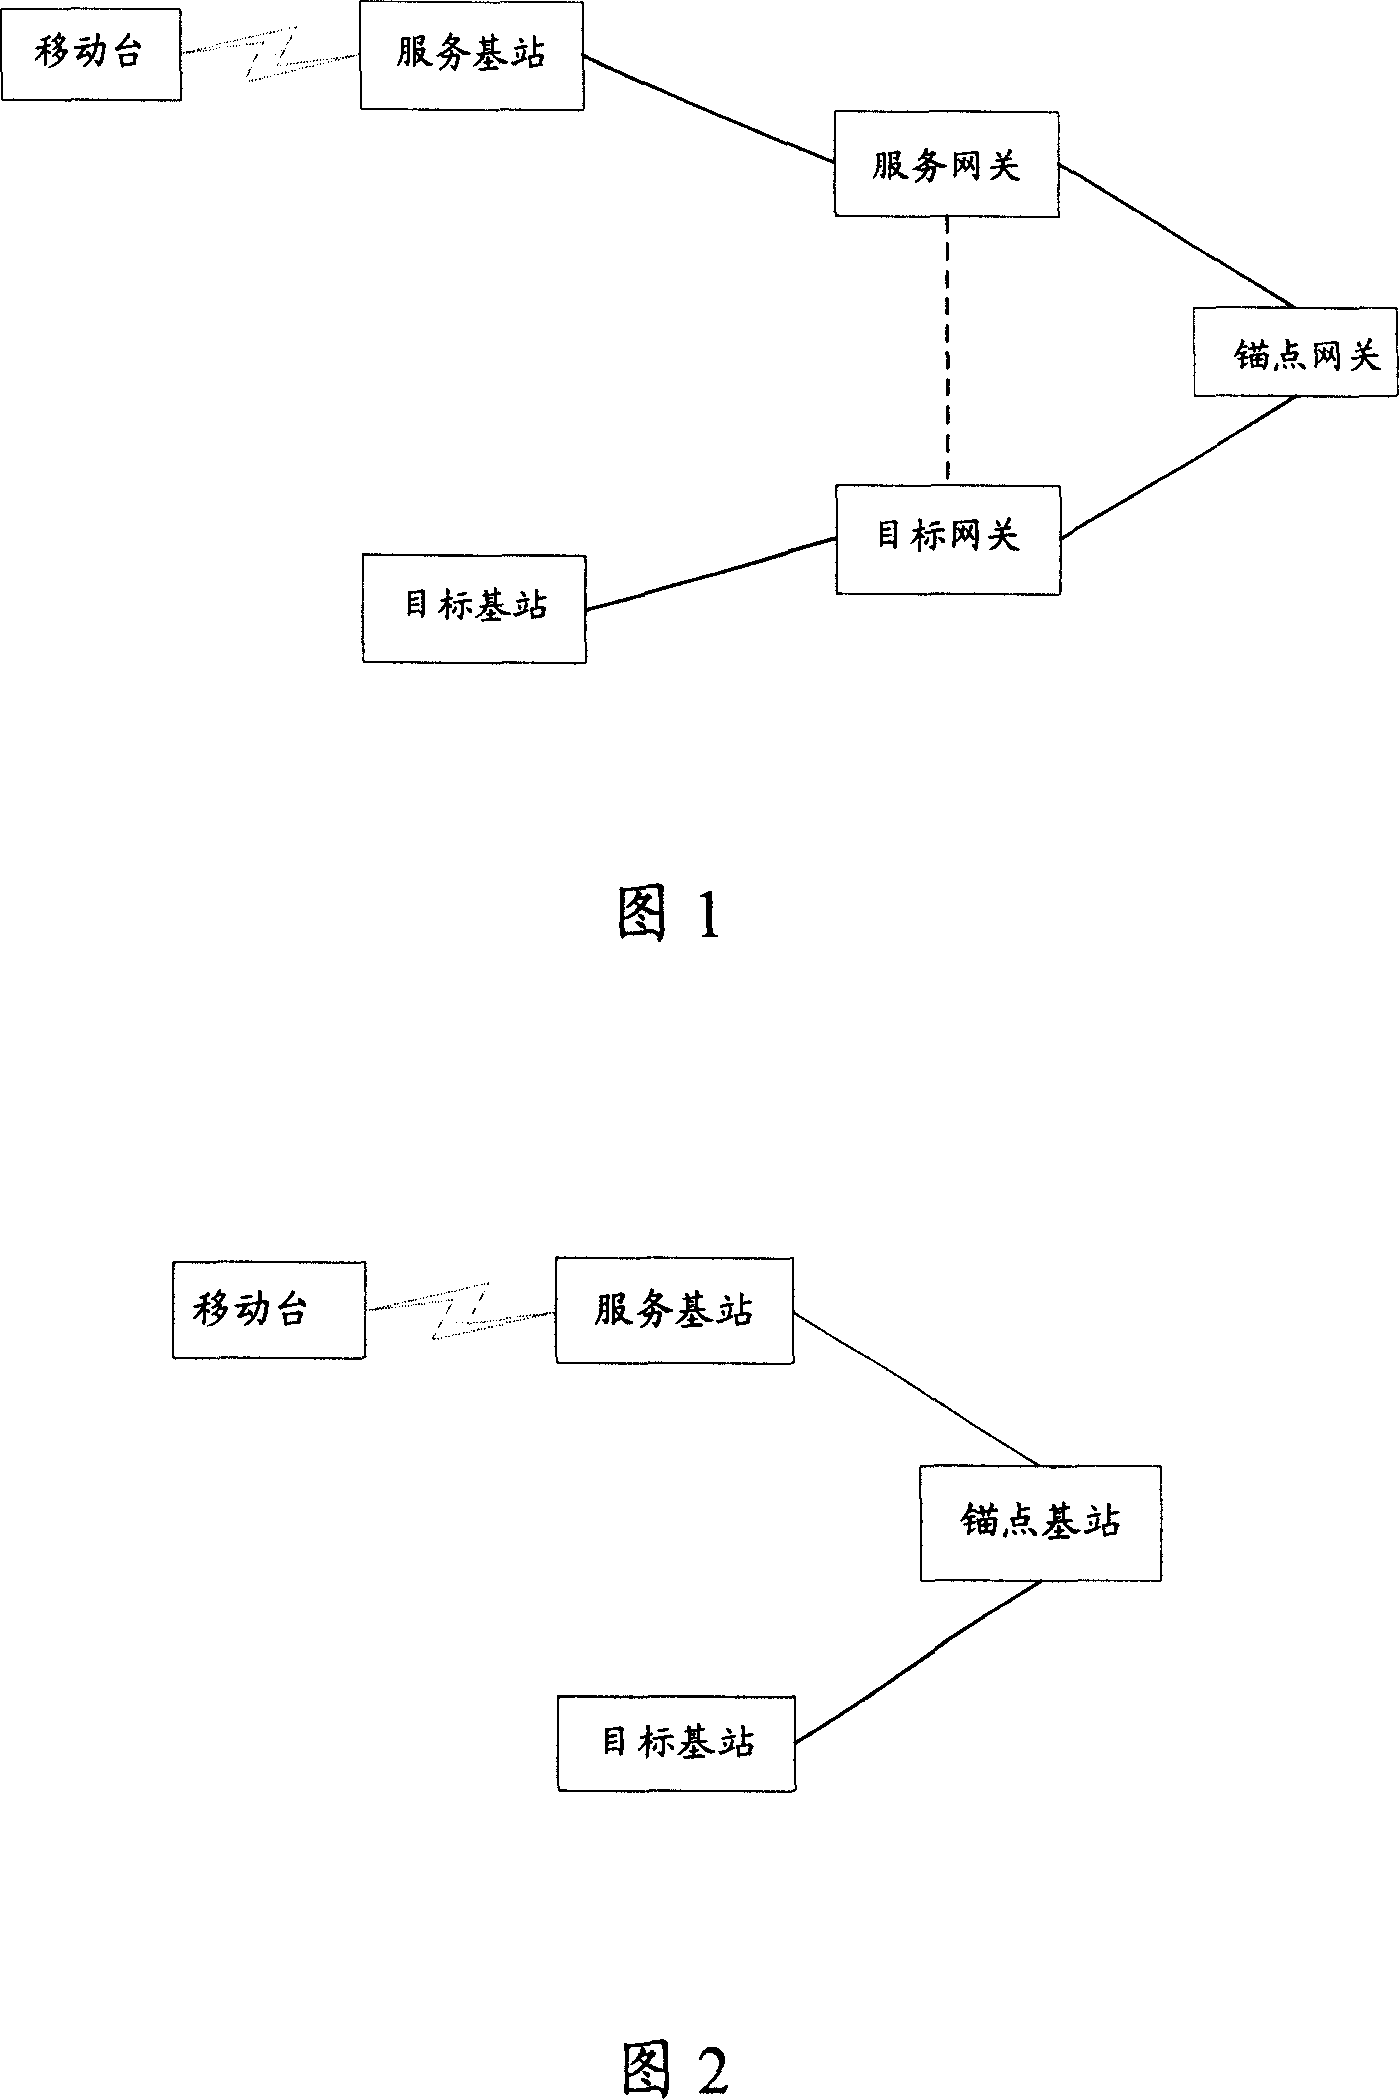 Method for controlling mobile-platform lossless switch in WiMAX system and telecommunication equipment